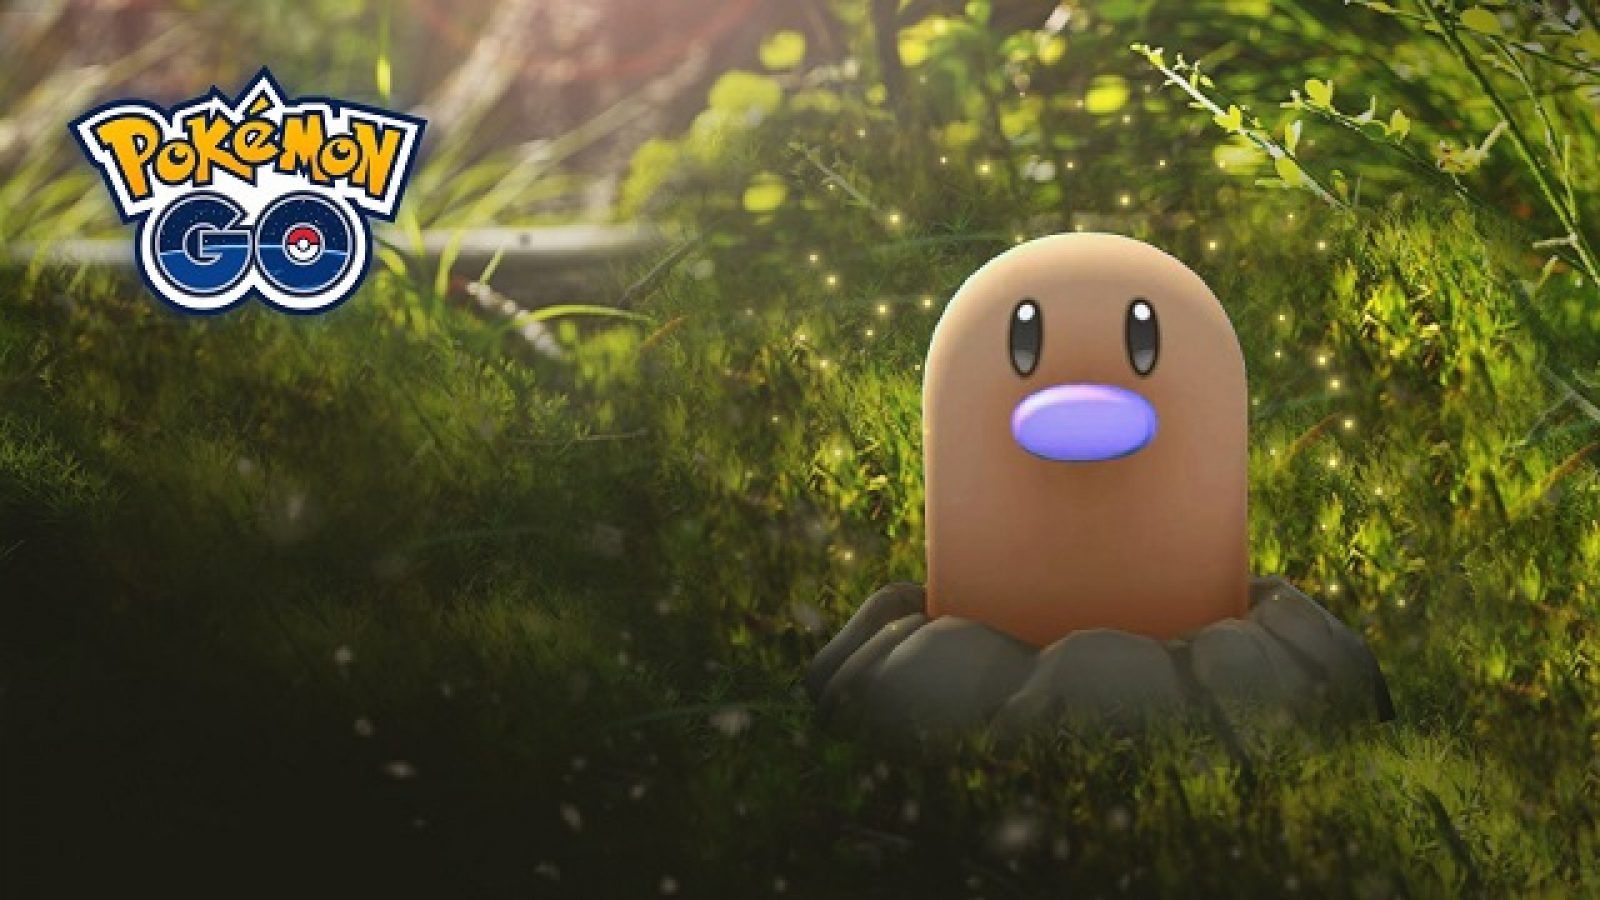 Pokémon GO Will Release Shiny Diglett For Earth Day If Enough Players Join In